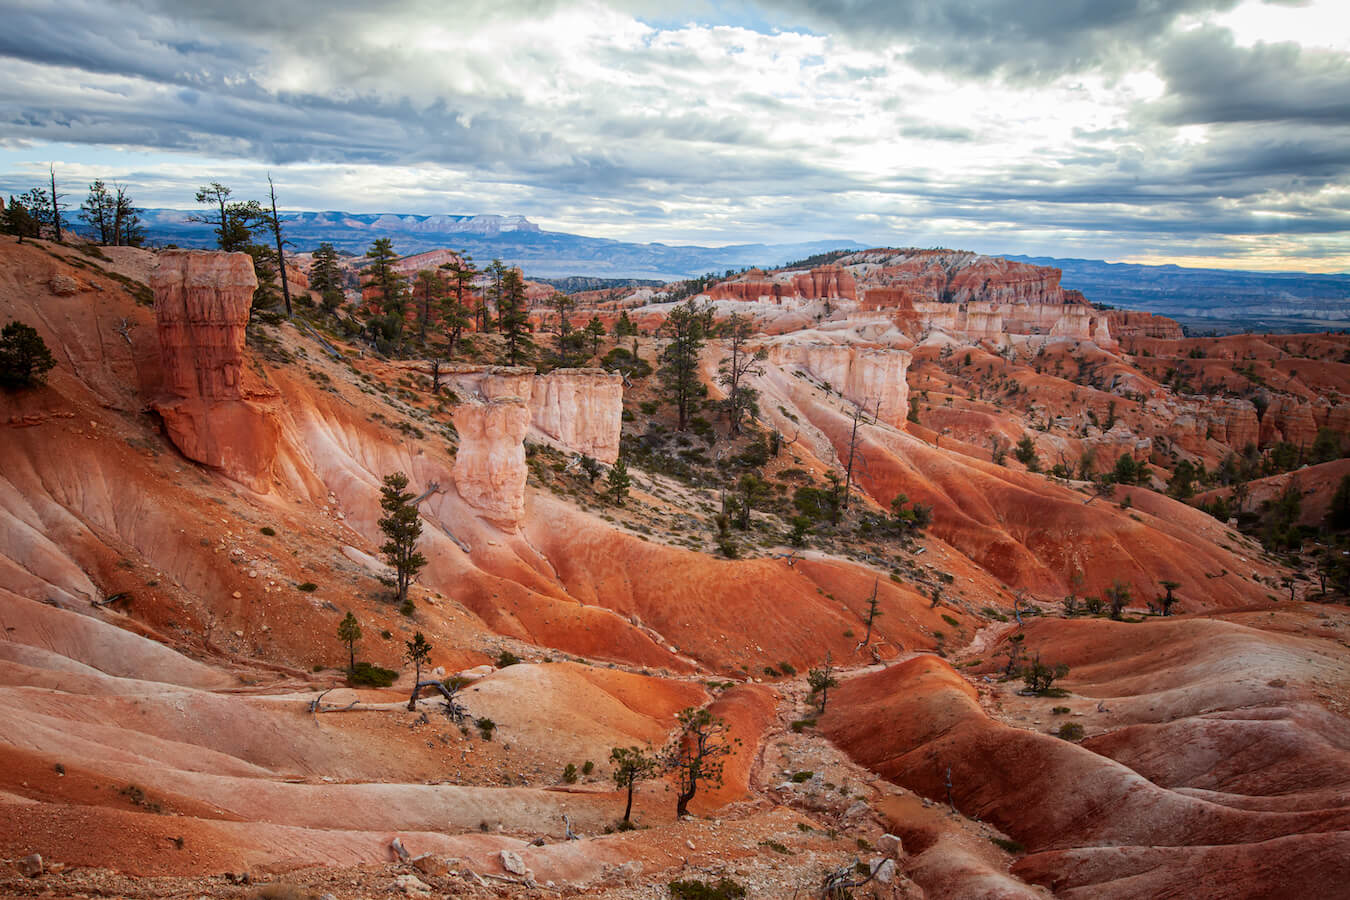 Sunrise Point, Queen's Garden Trail, Bryce Canyon National Park, Utah | Photo Credit: Vezzani Photography